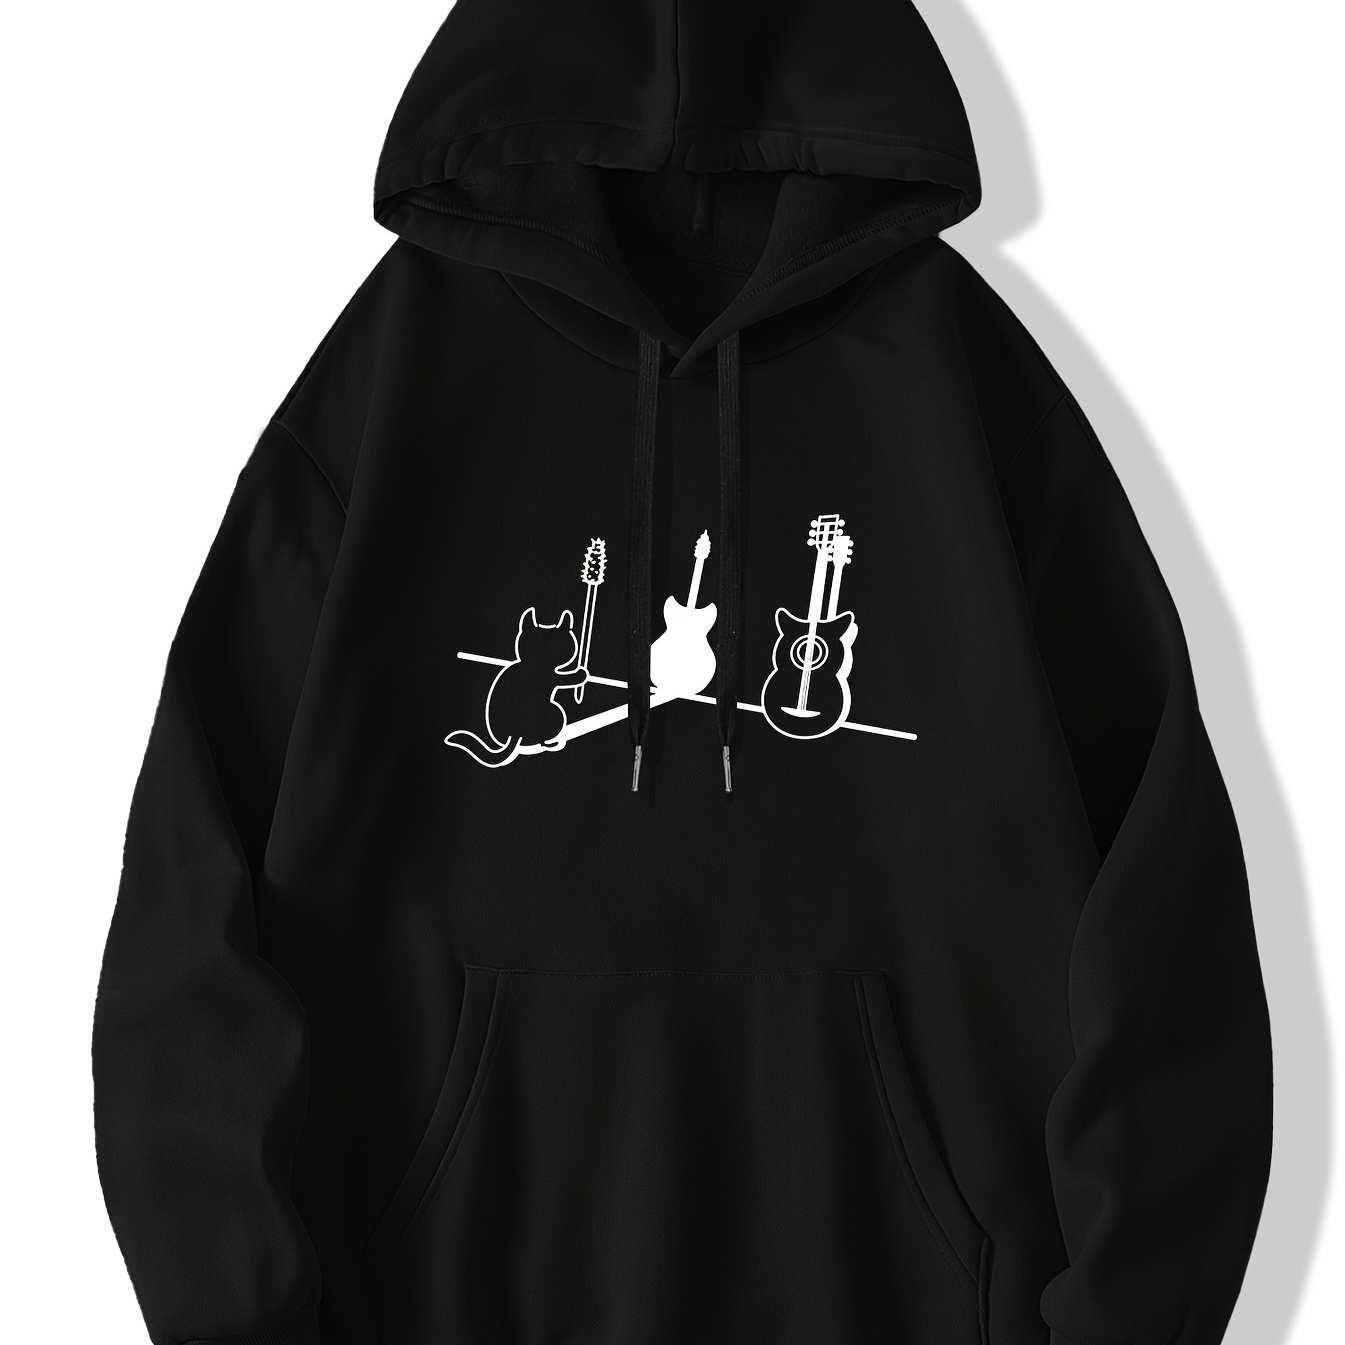 

Black And White Cat With Guitars Print Sweatshirt, Creative Graphic Design Hoodies For Men, Men's Slightly Flex Hooded Streetwear Pullover, For All Seasons, As Gifts